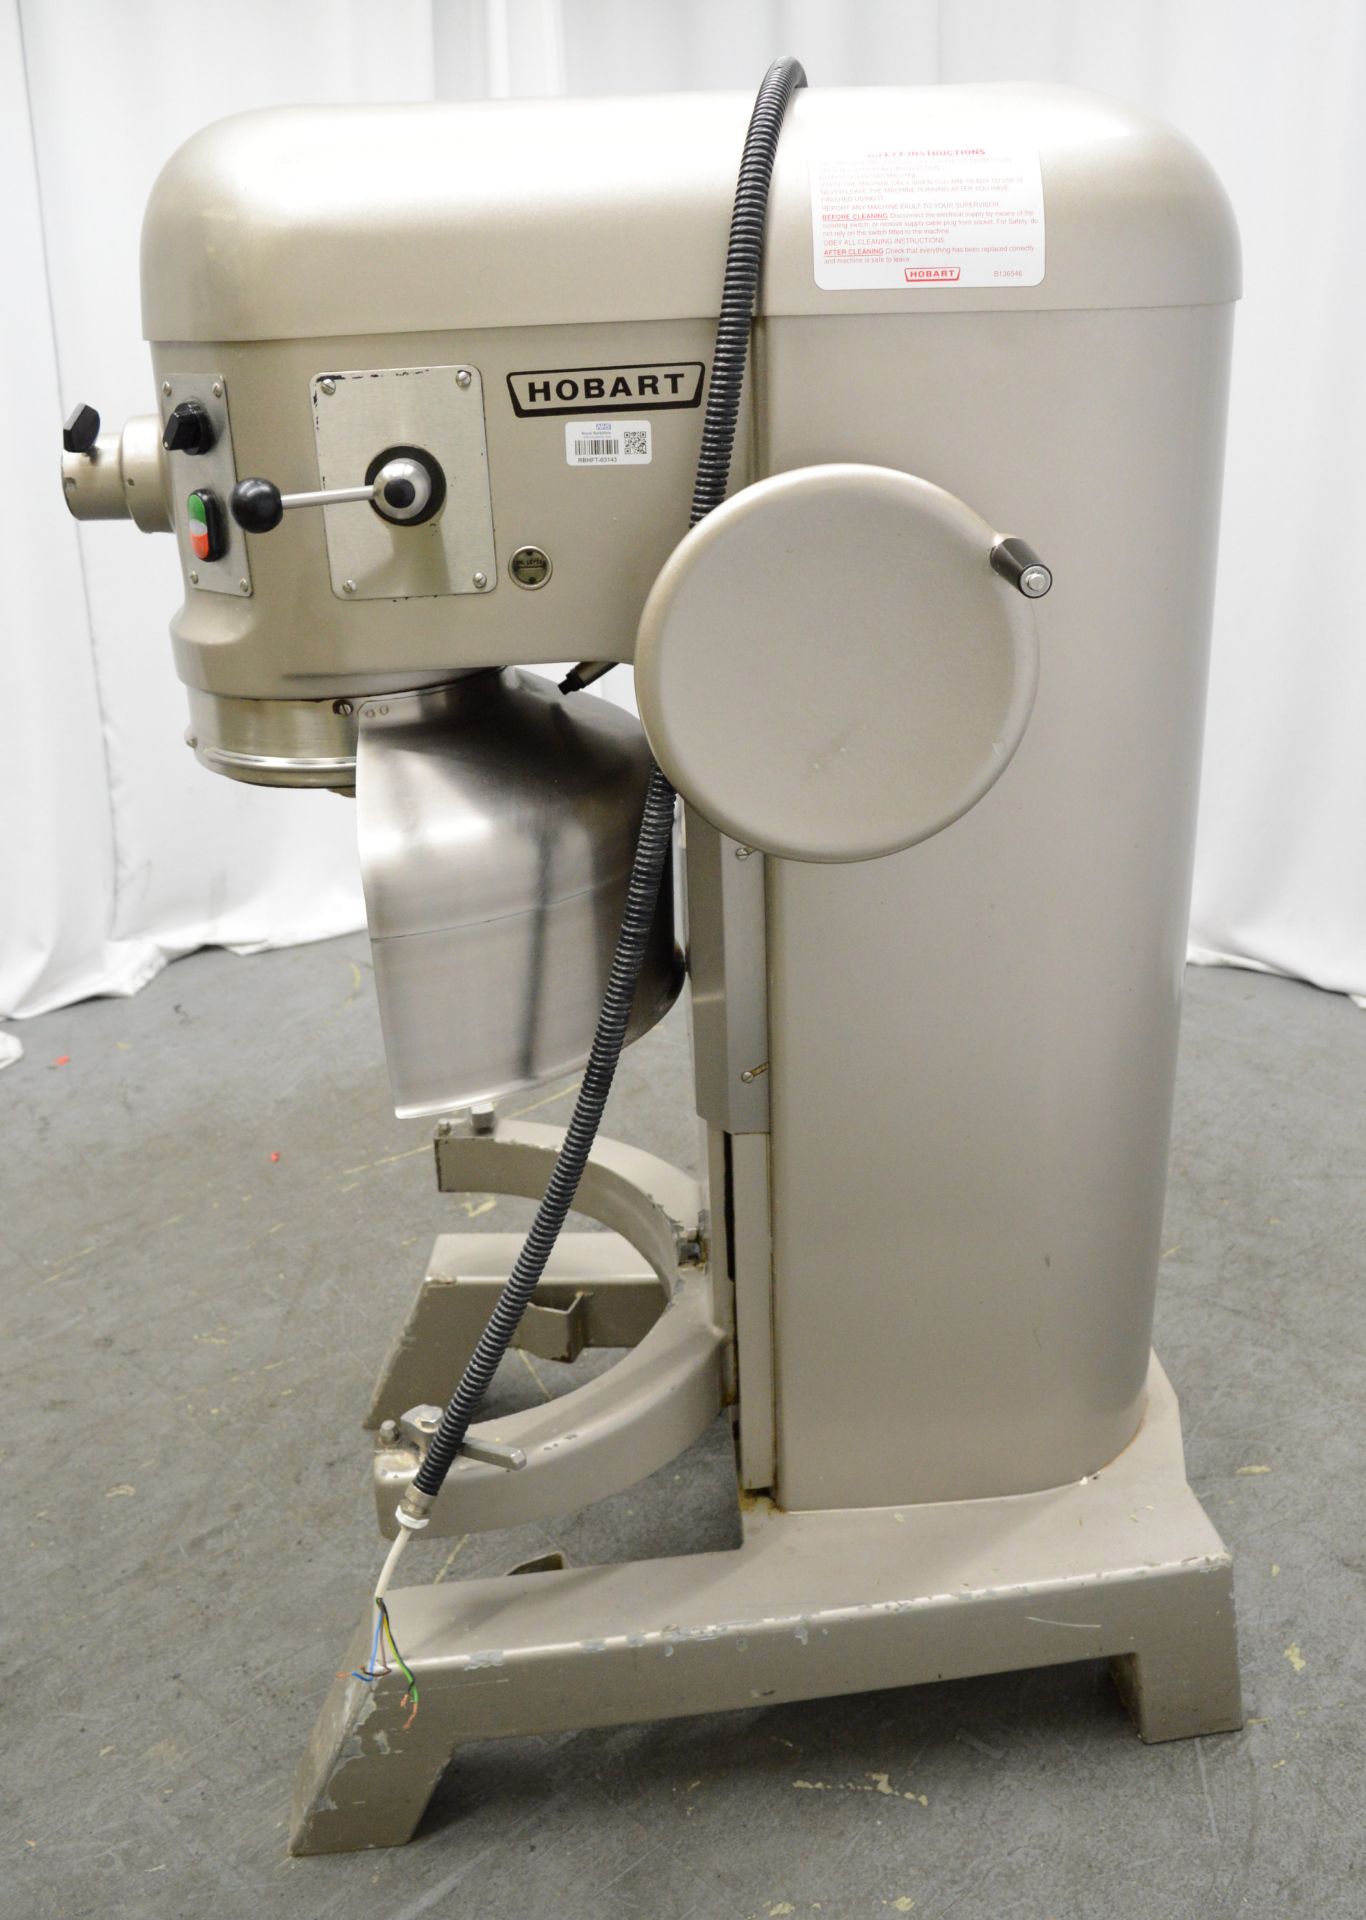 Hobart H800 80 litre food mixer with attachments, 1 phase electric - Image 4 of 9